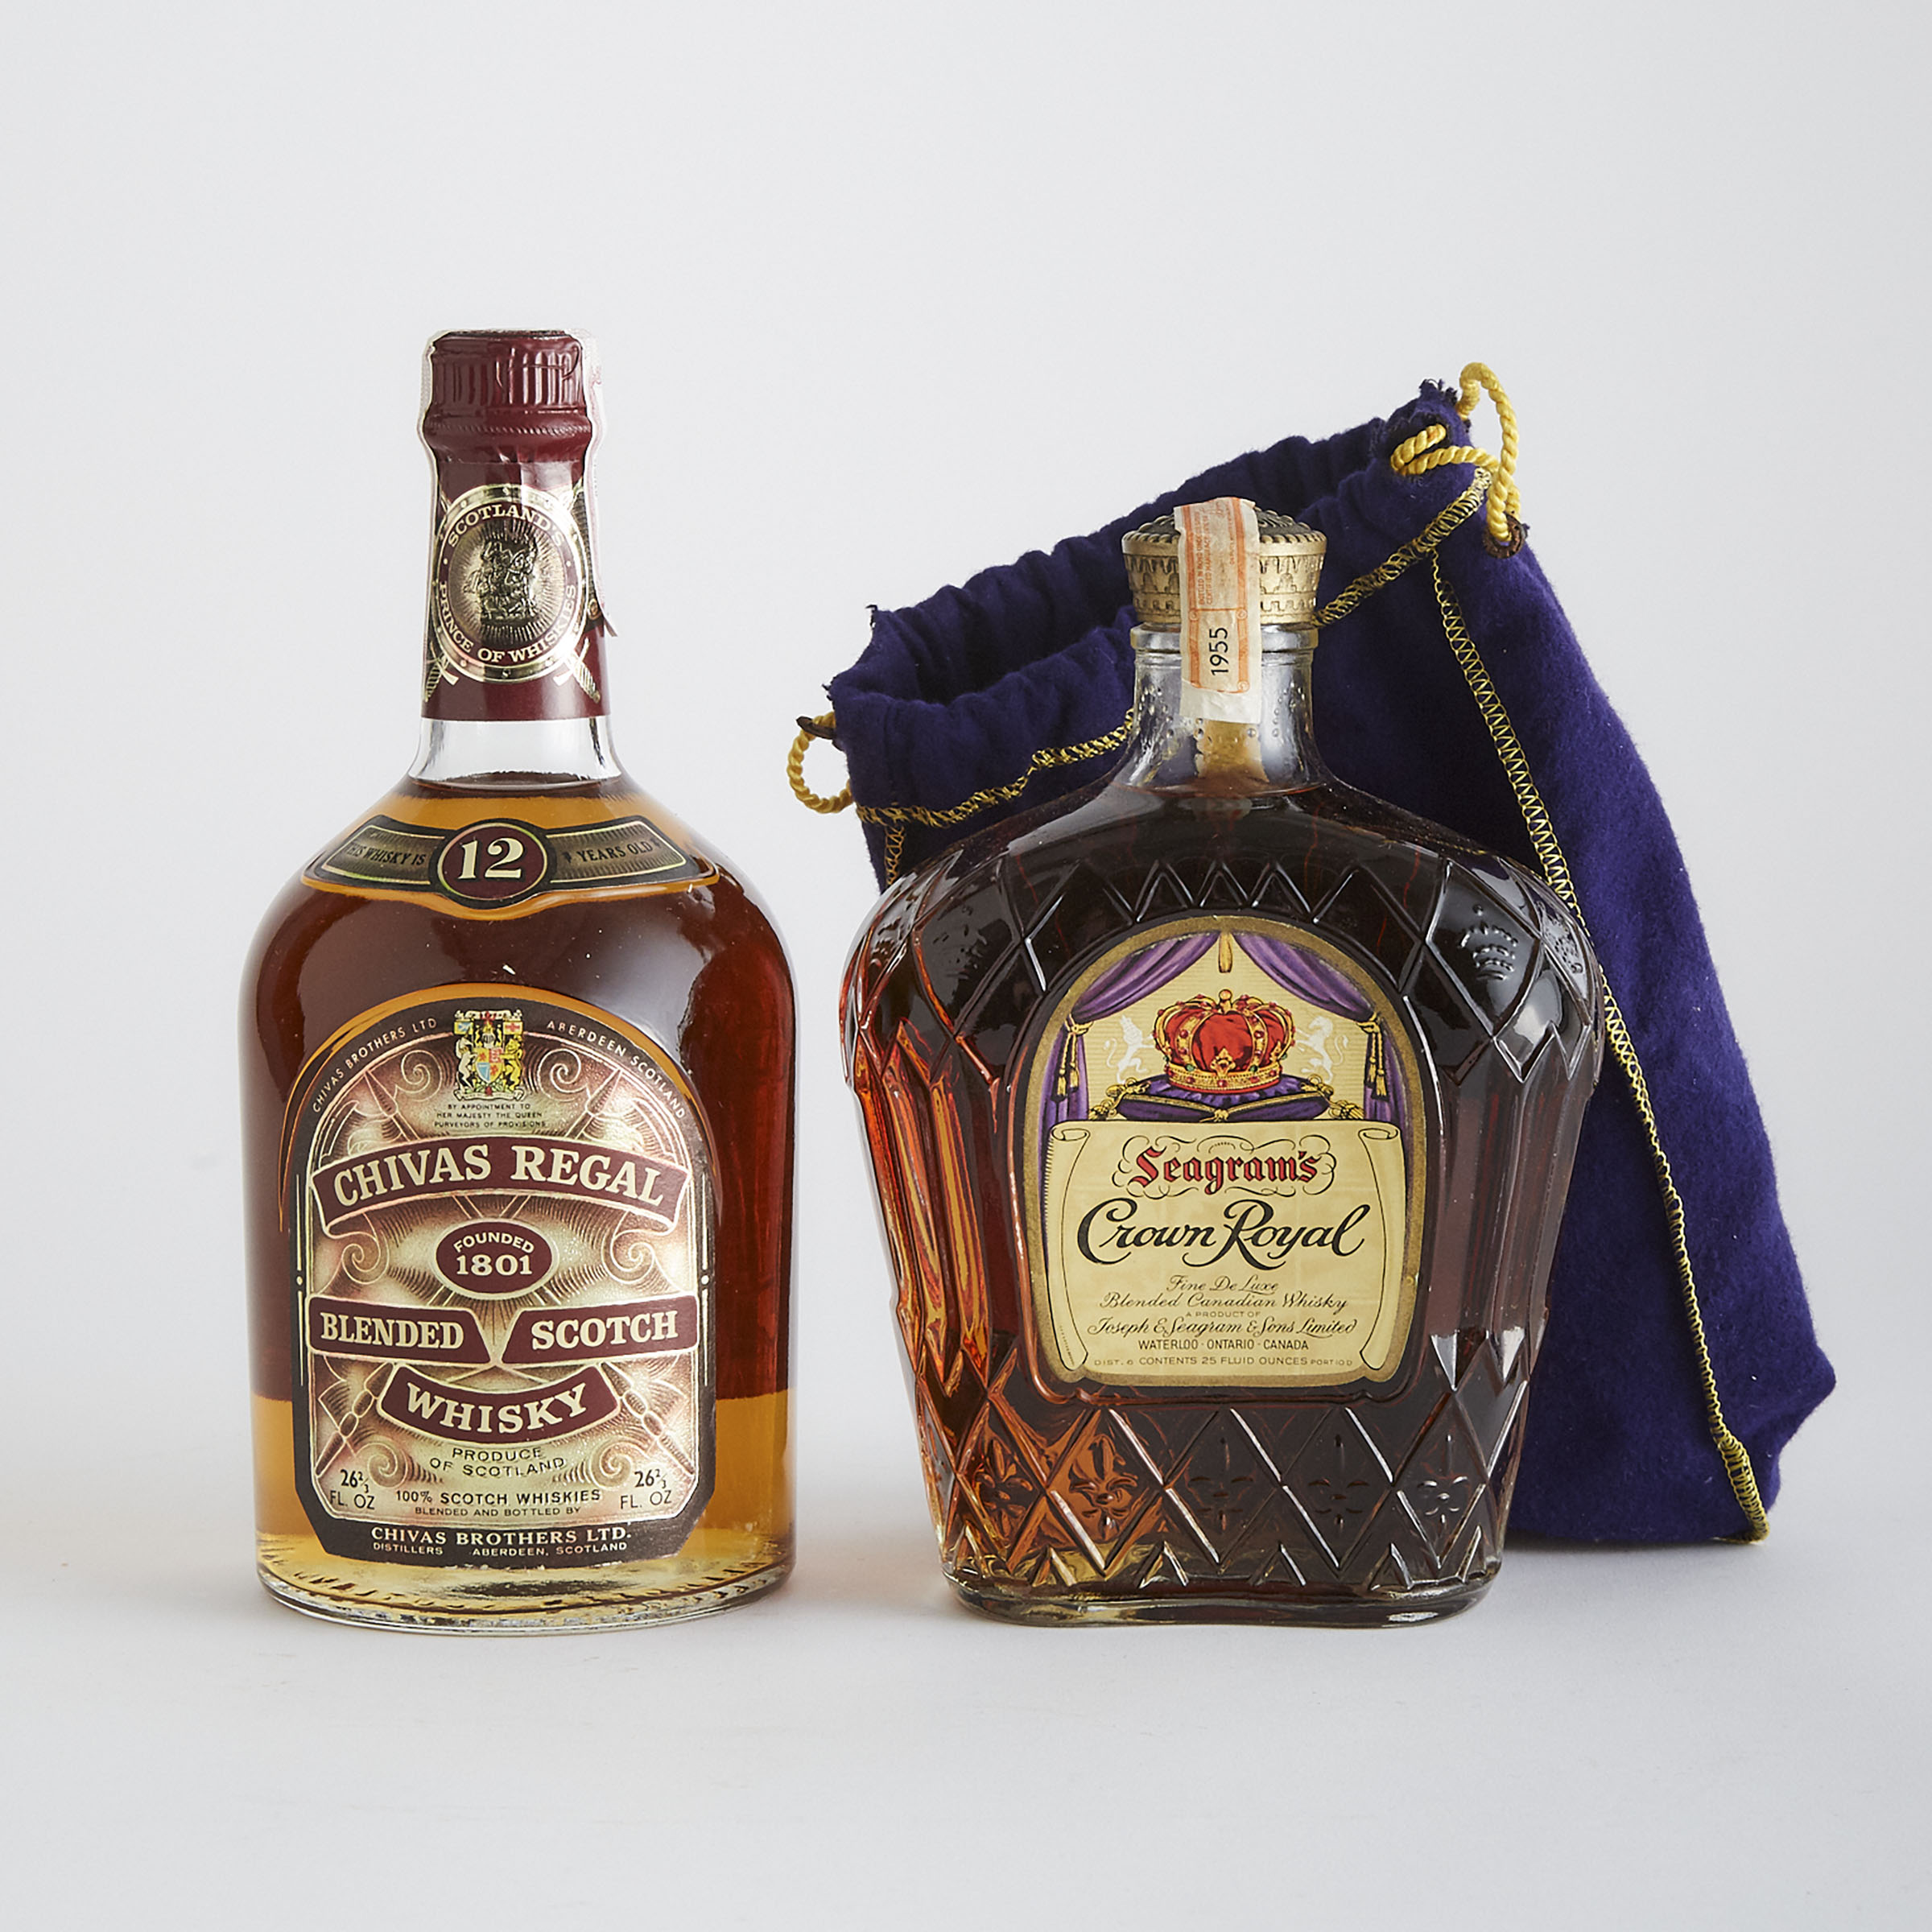 CHIVAS REGAL BLENDED SCOTCH WHISKY 12 YEARS (ONE 26 2/3 OZ)
SEAGRAM'S CROWN ROYAL FINE DE LUXE BLENDED CANADIAN WHISKY NAS (ONE 25 OZ)